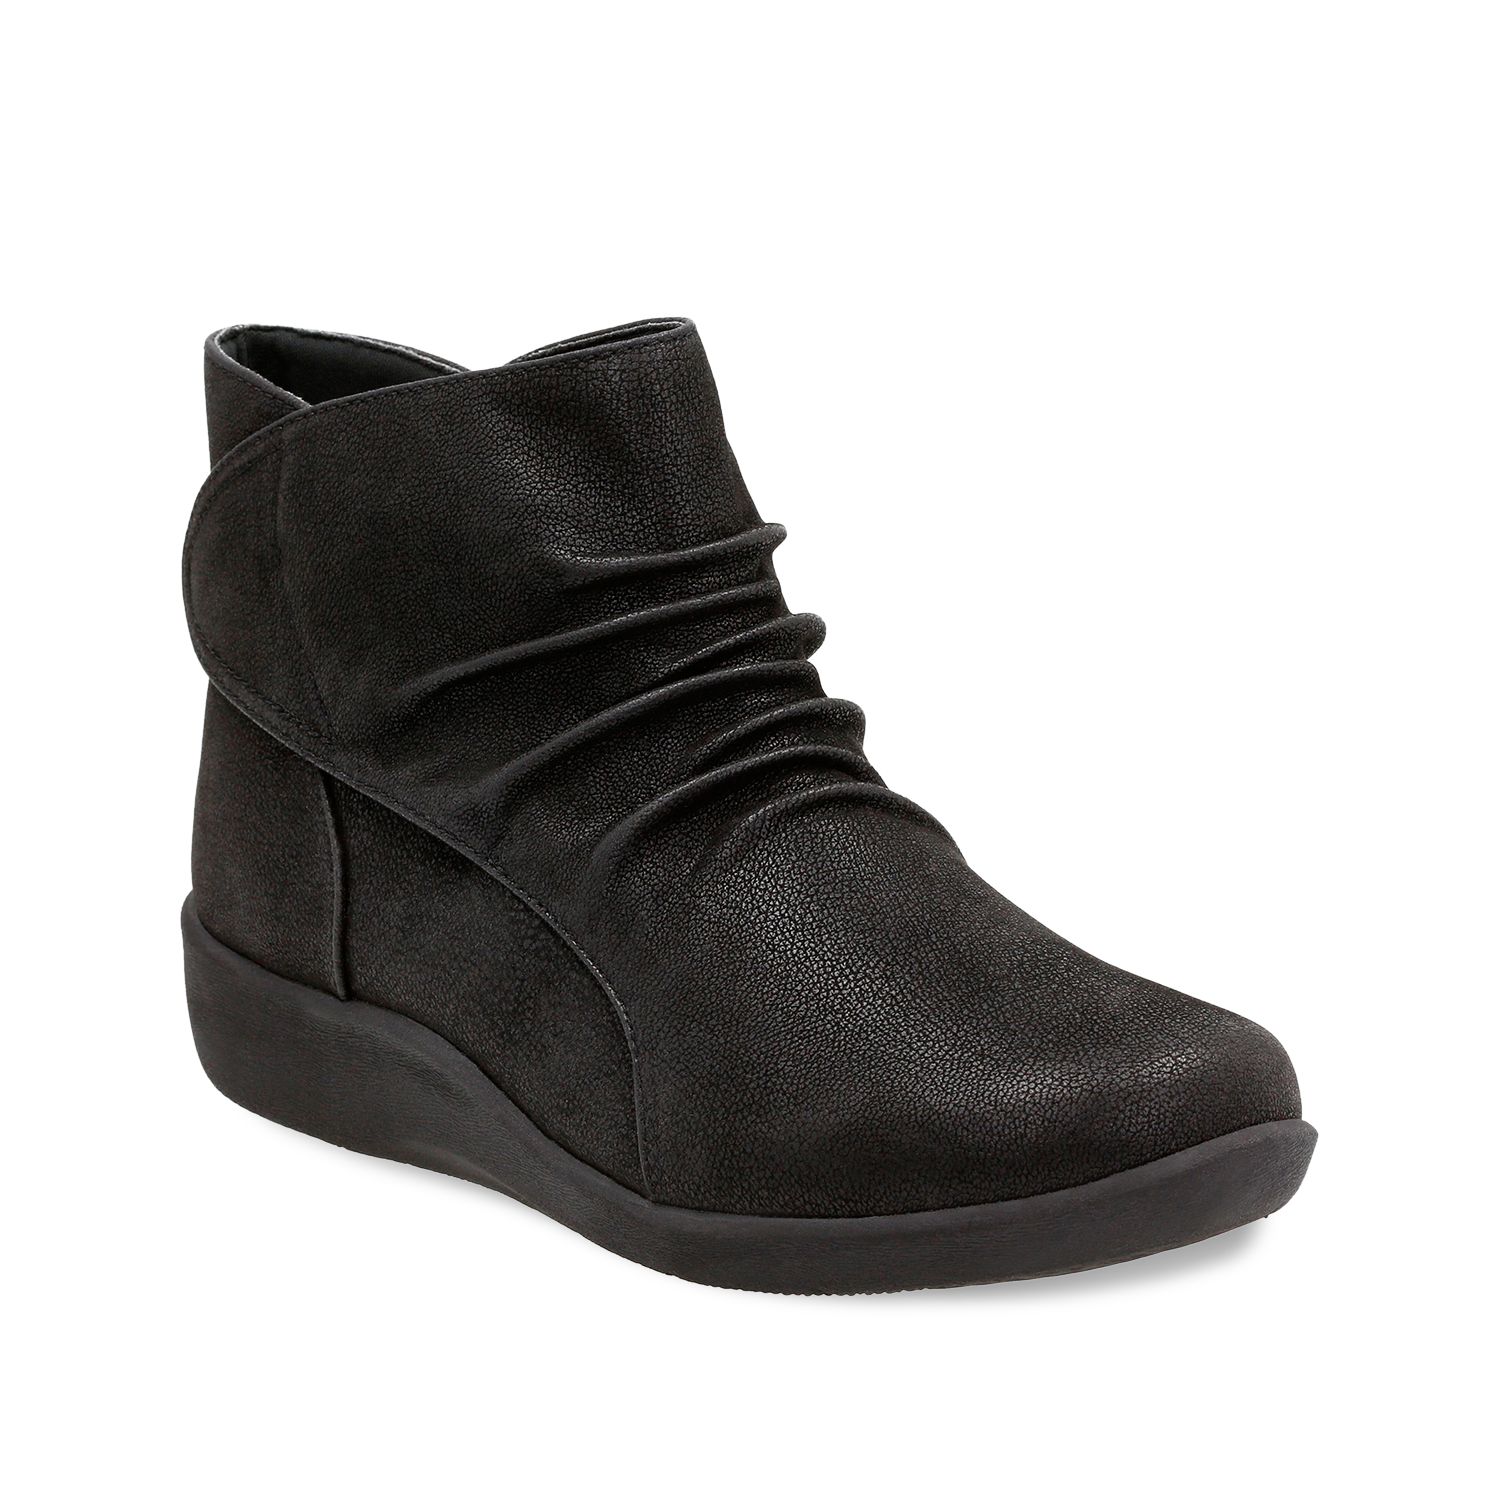 clarks sillian sway ankle boots